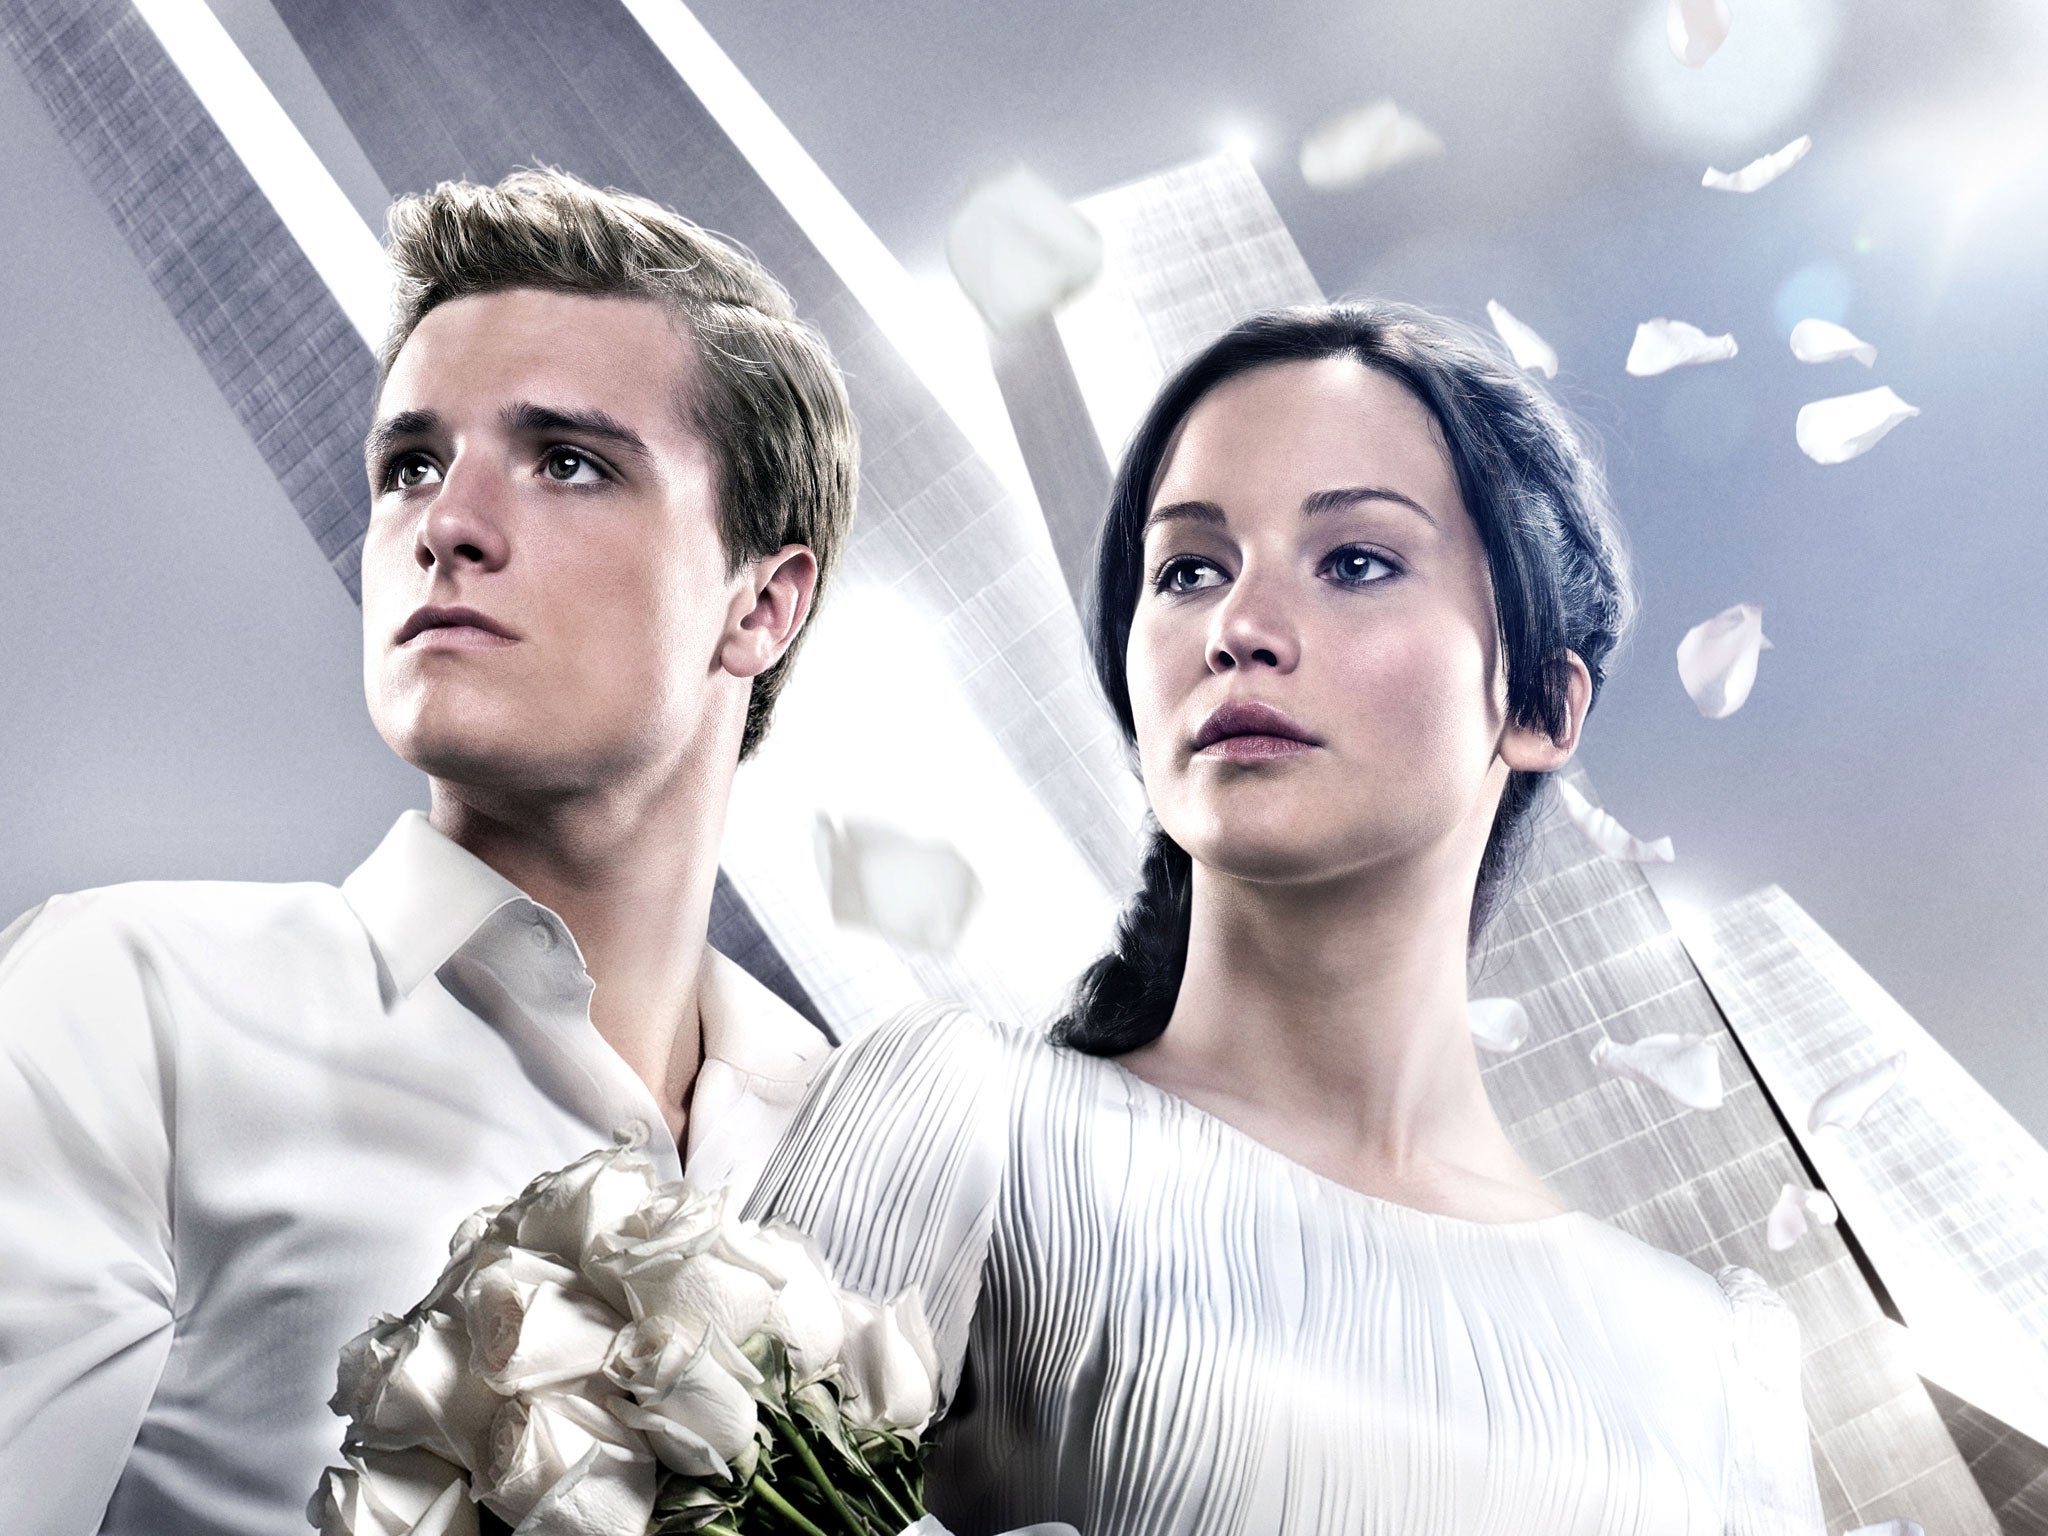 Josh Hutcherson and Jennifer Lawrence star in The Hunger Games: Catching Fire